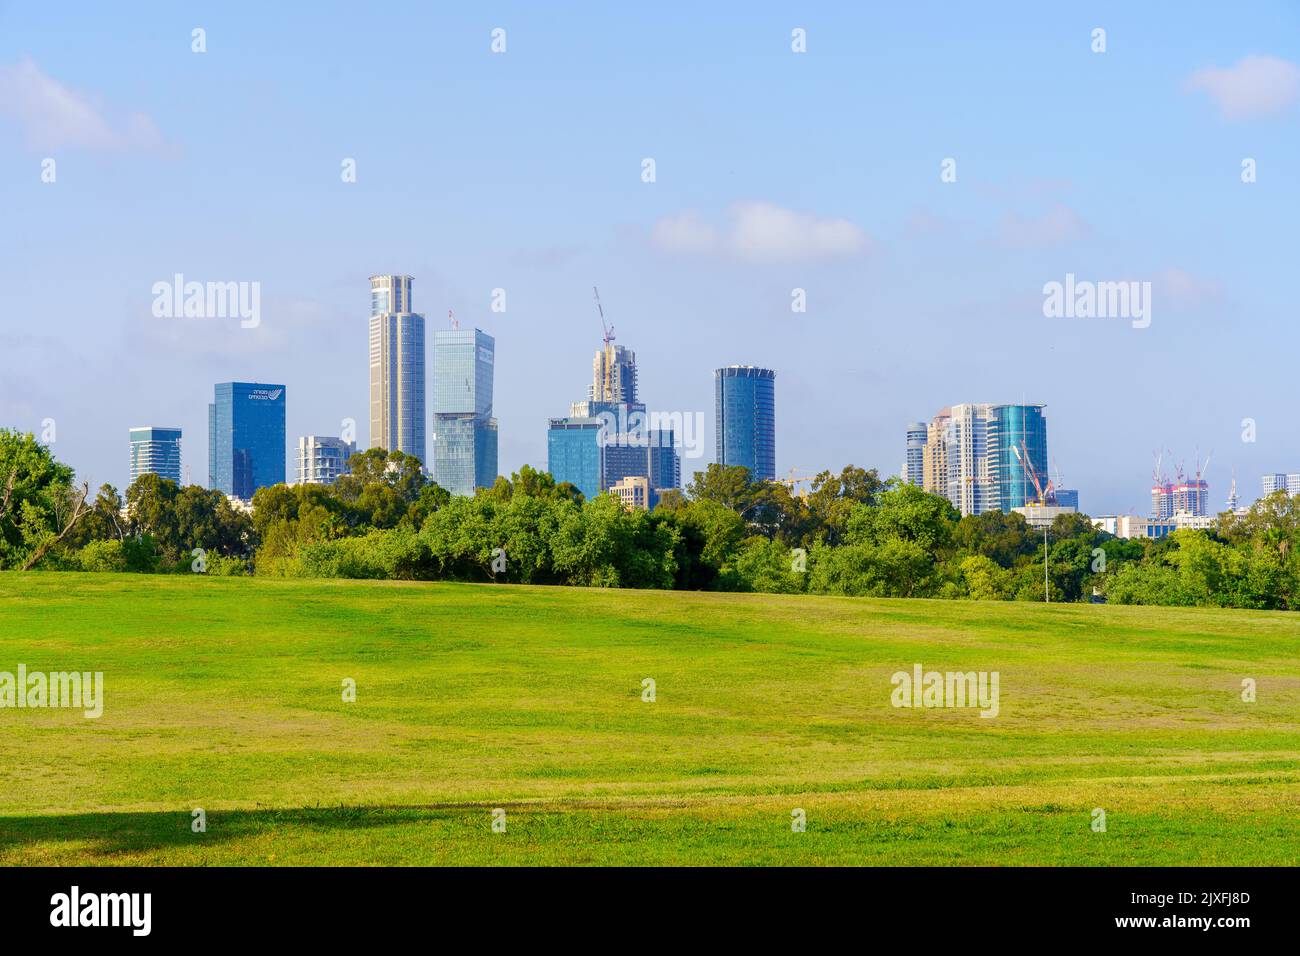 Tel-Aviv, Israel - June 17, 2022: View of lawns, trees, and office buildings in the background, in the Yarkon Park, Tel-Aviv, Israel Stock Photo